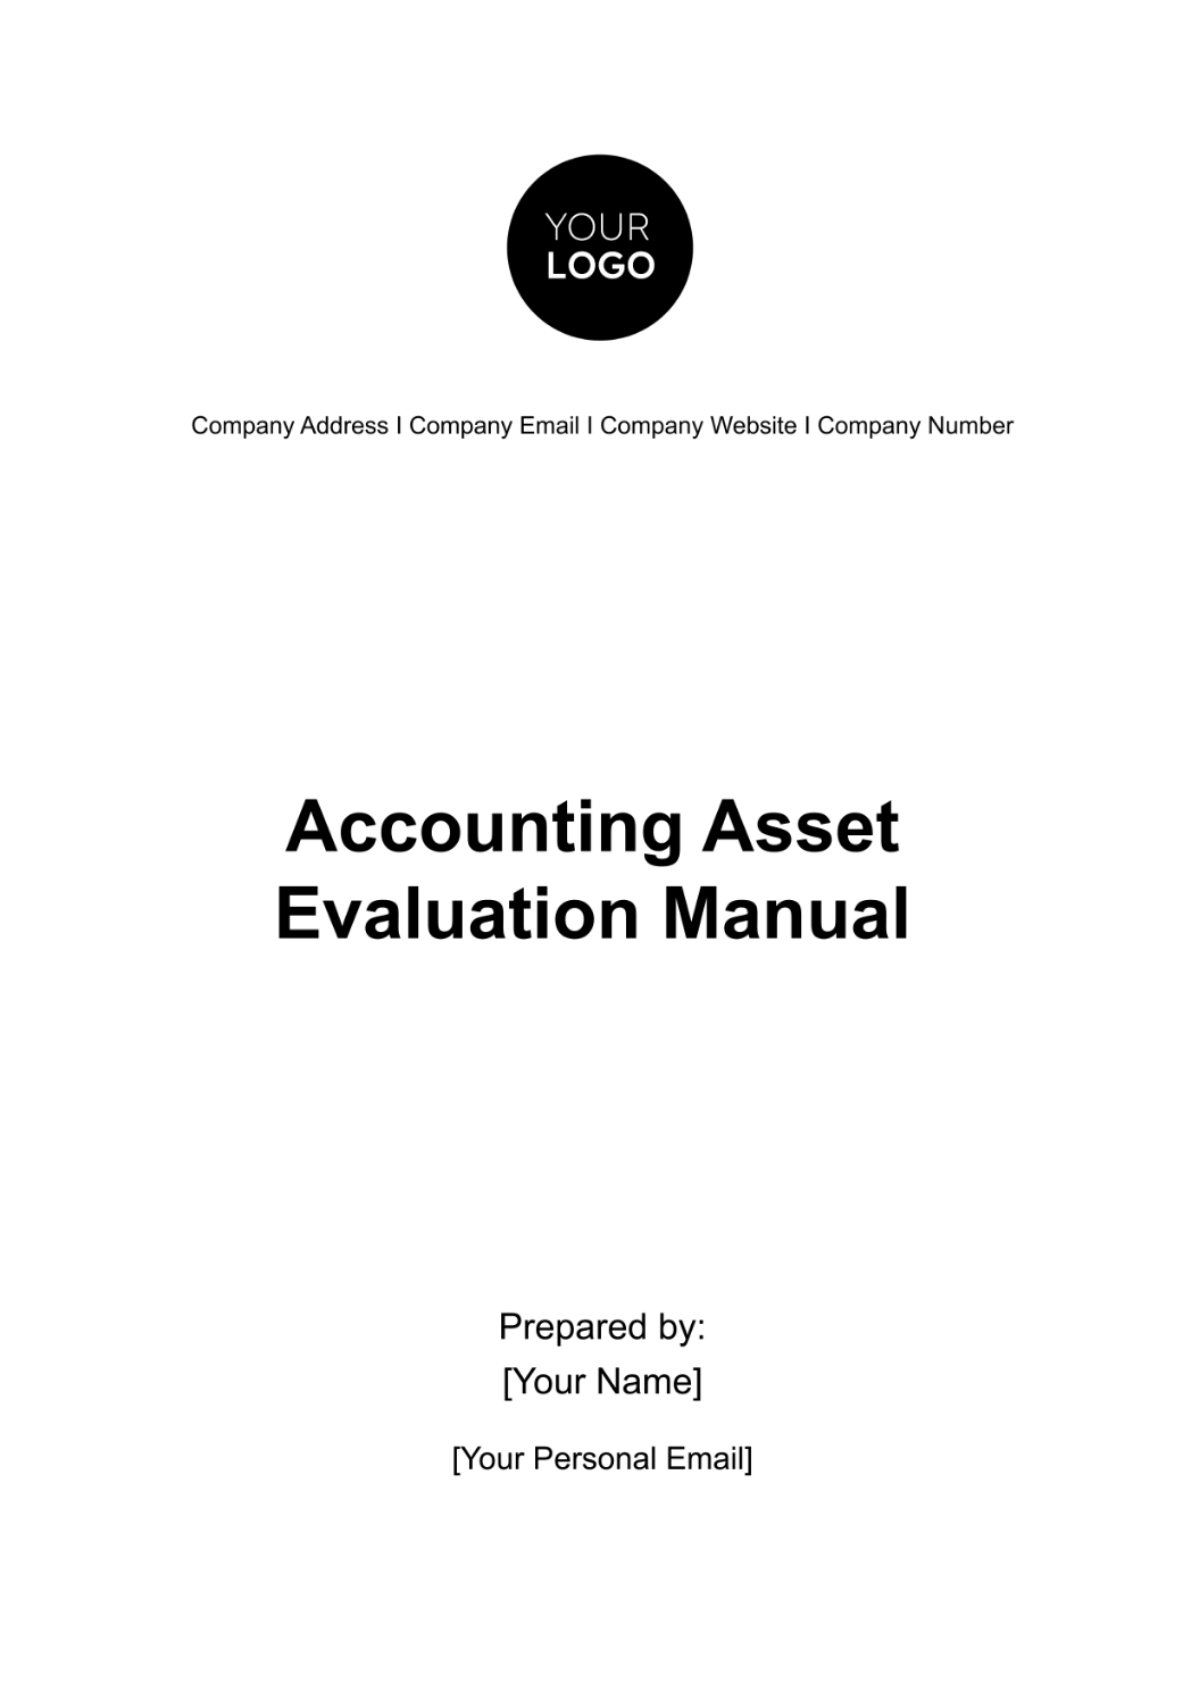 Accounting Asset Evaluation Manual Template